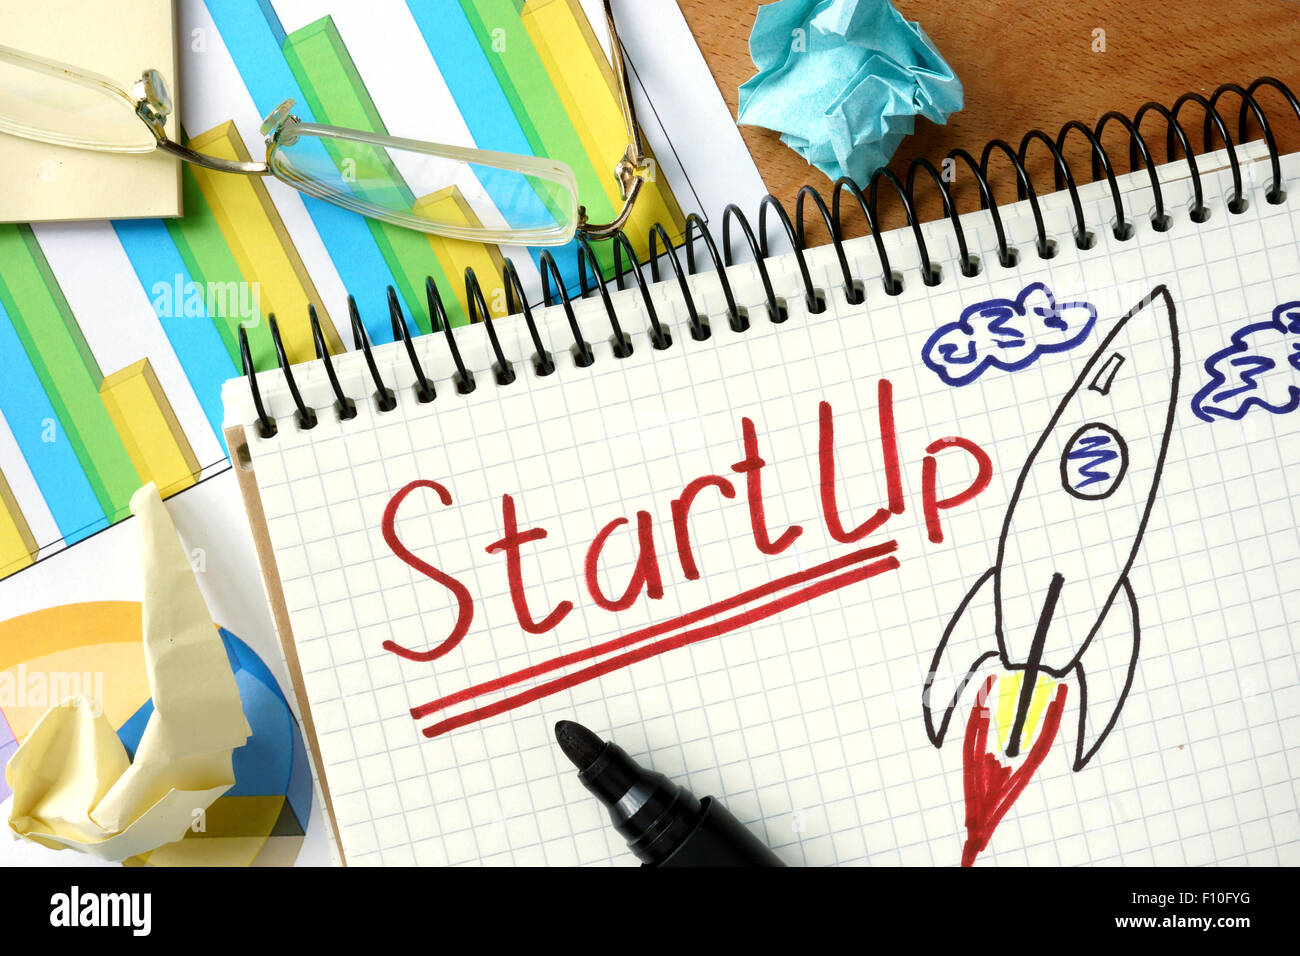 StartUp word written on the notepad and chart. Stock Photo